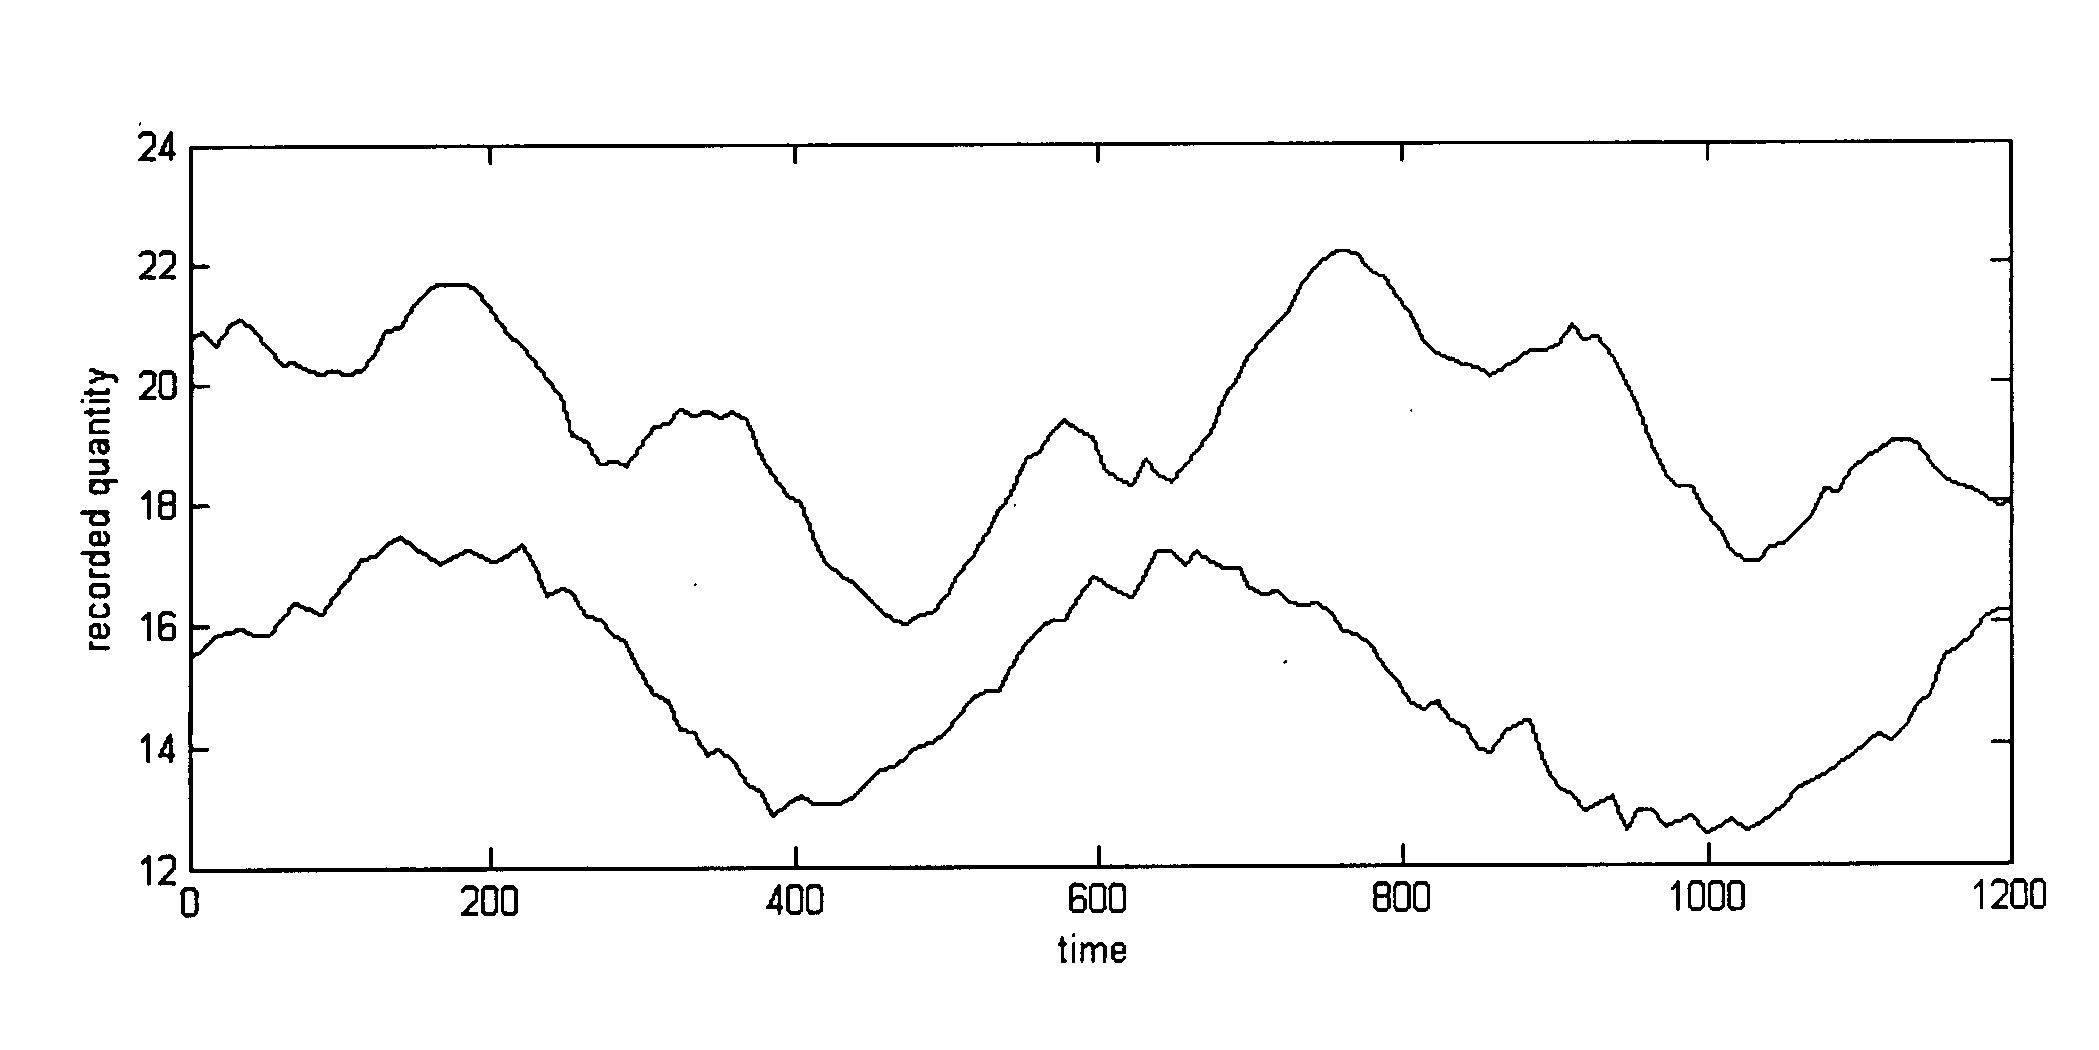 Measurement method of time varying events in a target body and a method for displaying measurement data of different parameters of a target in which time dependent events occur